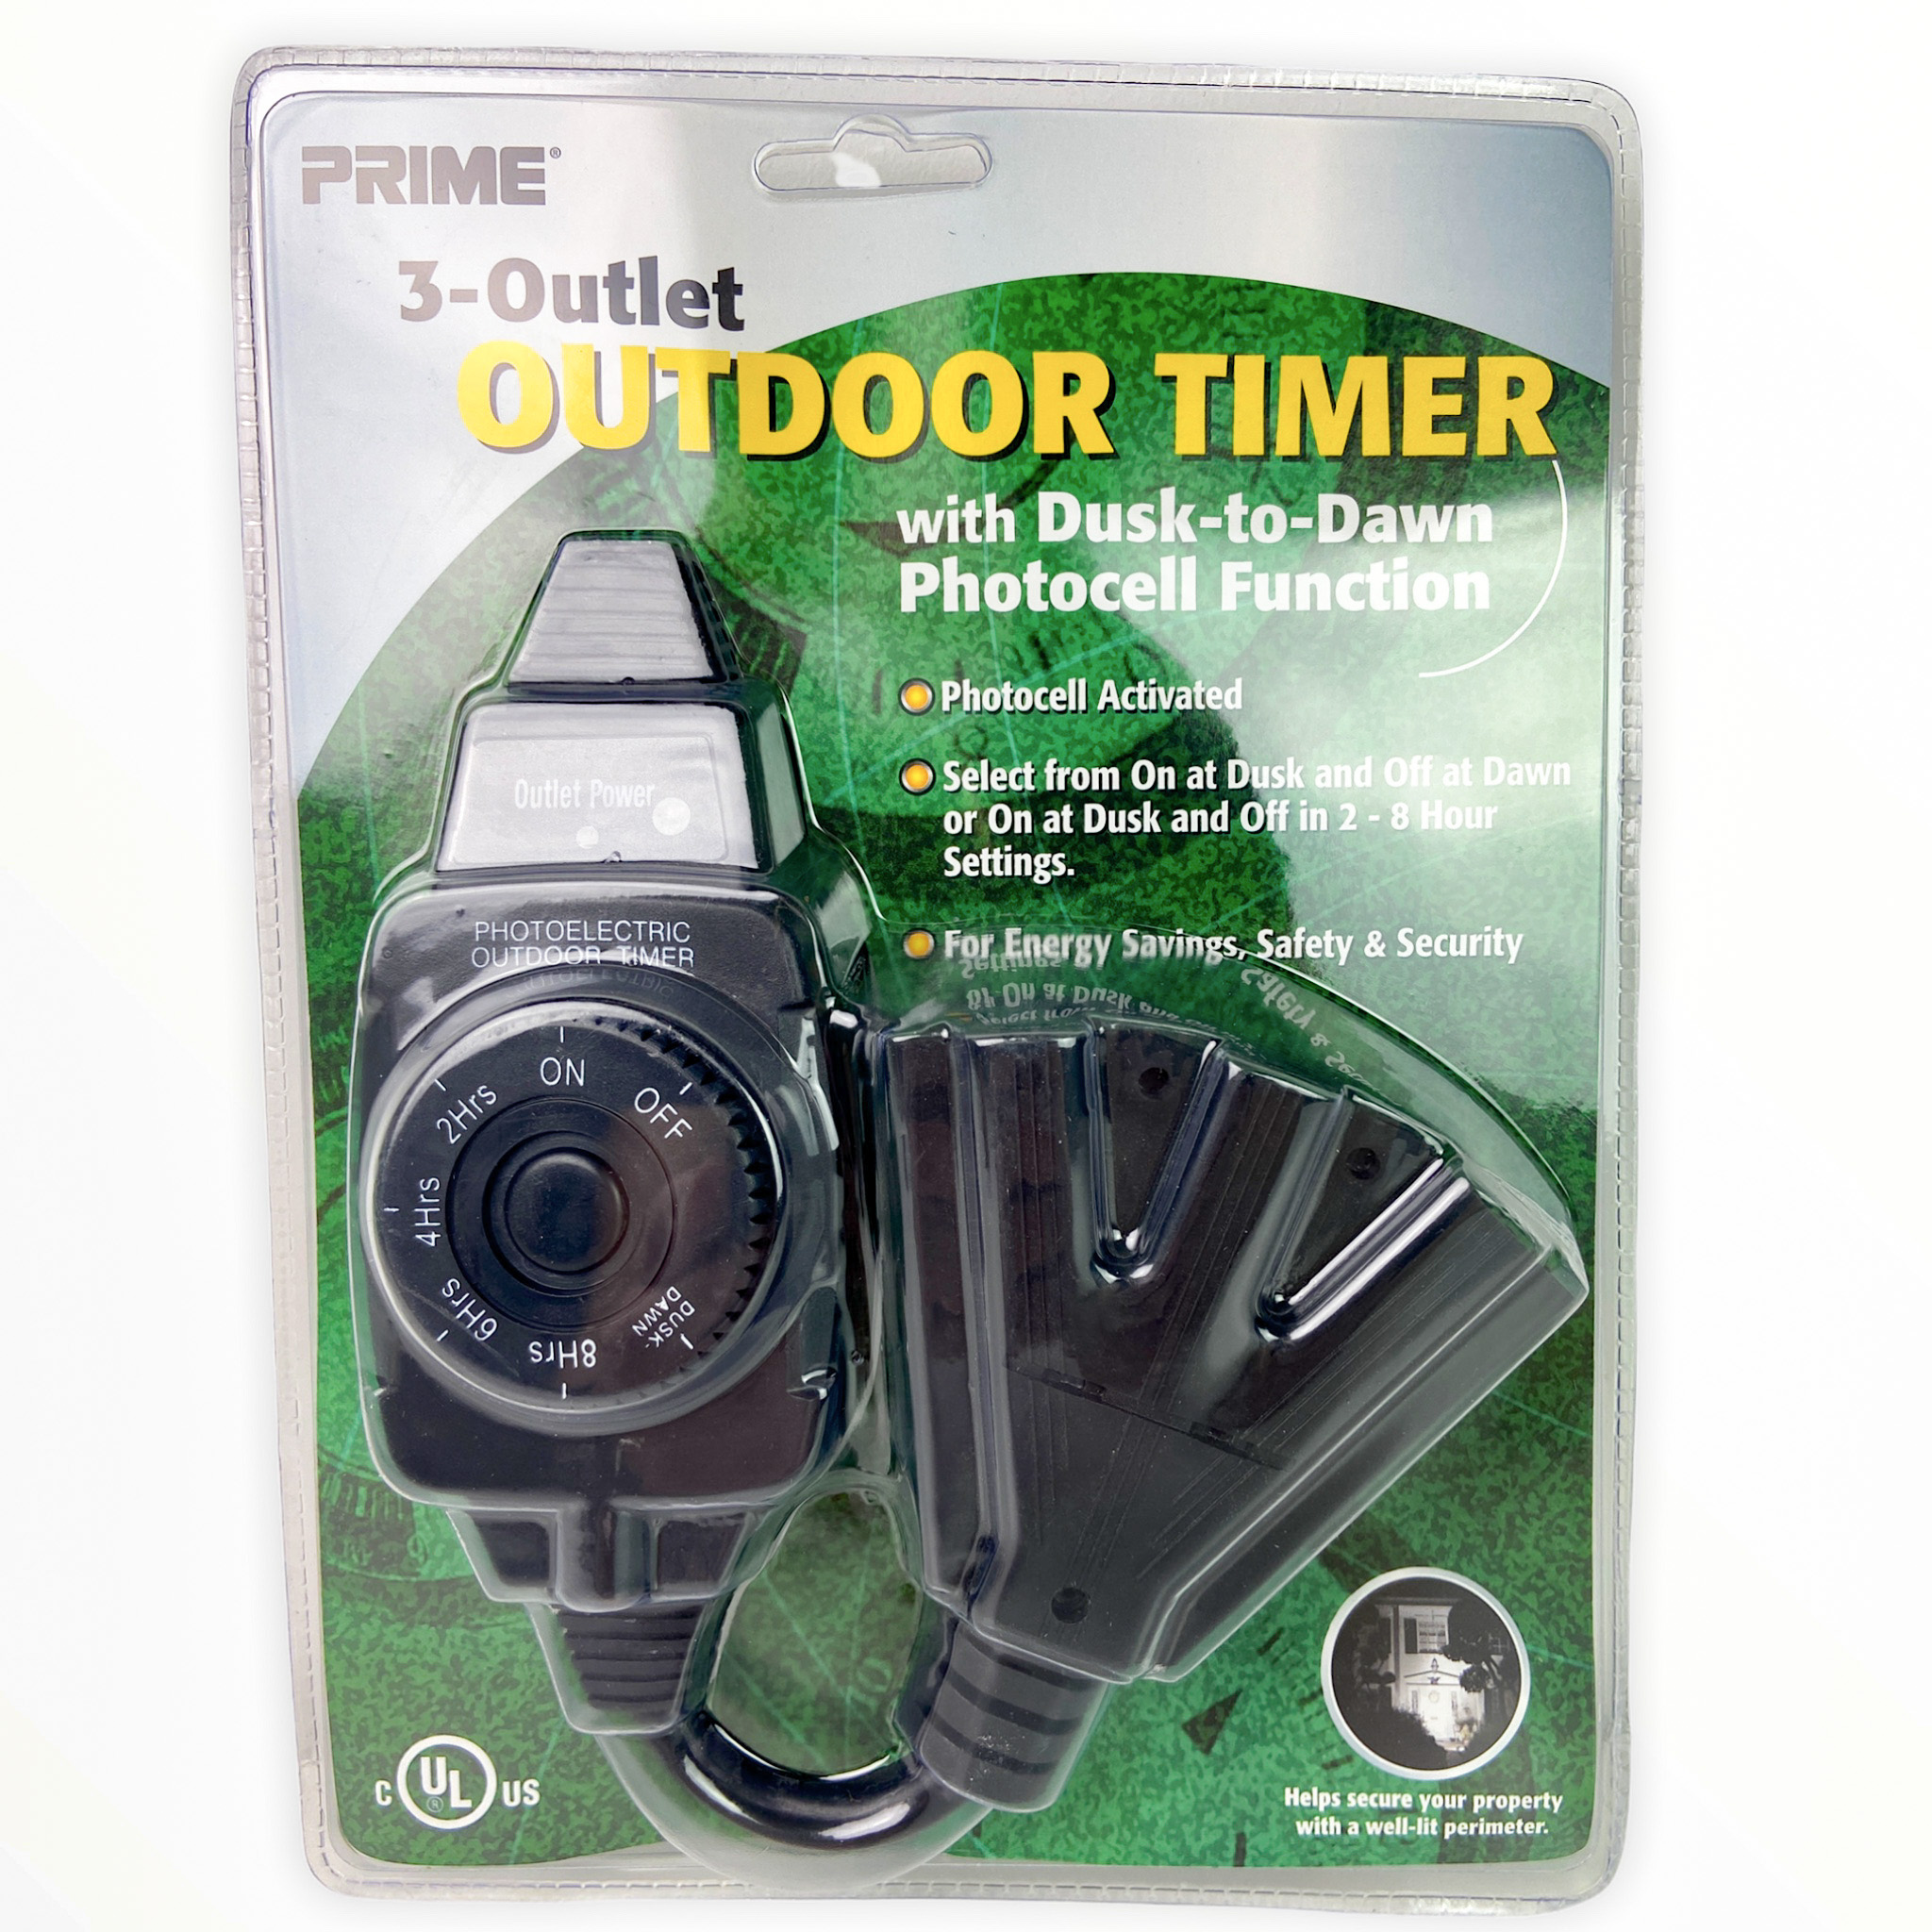 3 Outlet Outdoor Timer $14.99.